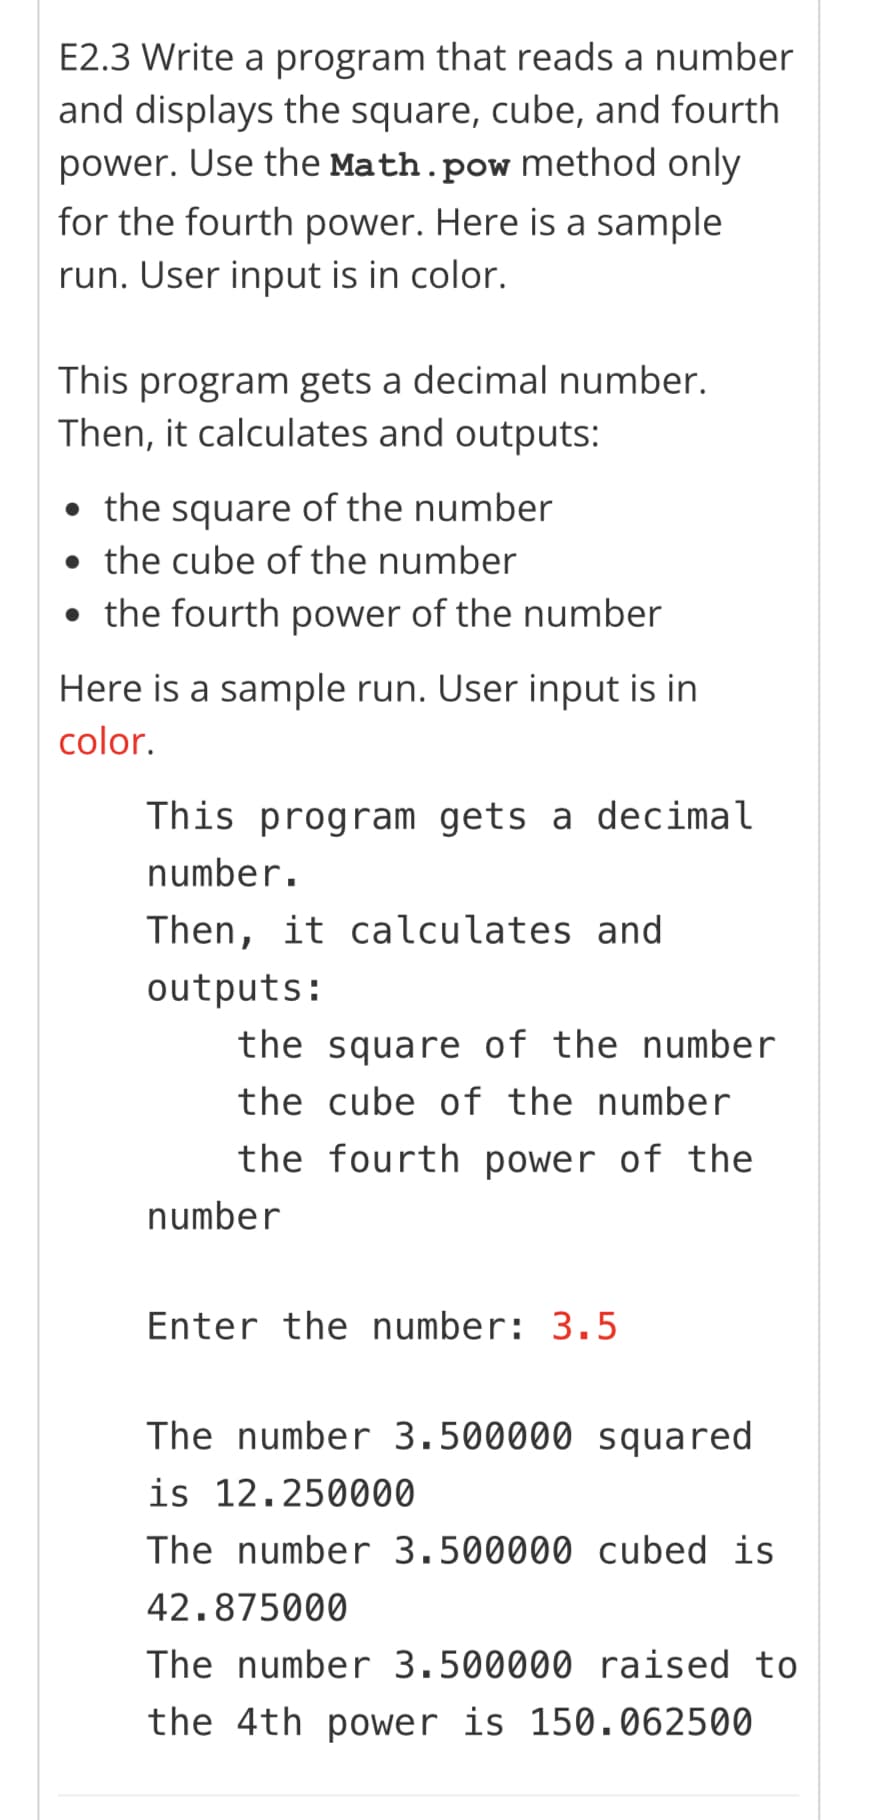 E2.3 Write a program that reads a number
and displays the square, cube, and fourth
power. Use the Math.pow method only
for the fourth power. Here is a sample
run. User input is in color.
This program gets a decimal number.
Then, it calculates and outputs:
• the square of the number
the cube of the number
the fourth power of the number
Here is a sample run. User input is in
color.
This program gets a decimal
number.
Then, it calculates and
outputs:
the square of the number
the cube of the number
the fourth power of the
number
Enter the number: 3.5
The number 3.500000 squared
is 12.250000
The number 3.500000 cubed is
42.875000
The number 3.500000 raised to
the 4th power is 150.062500